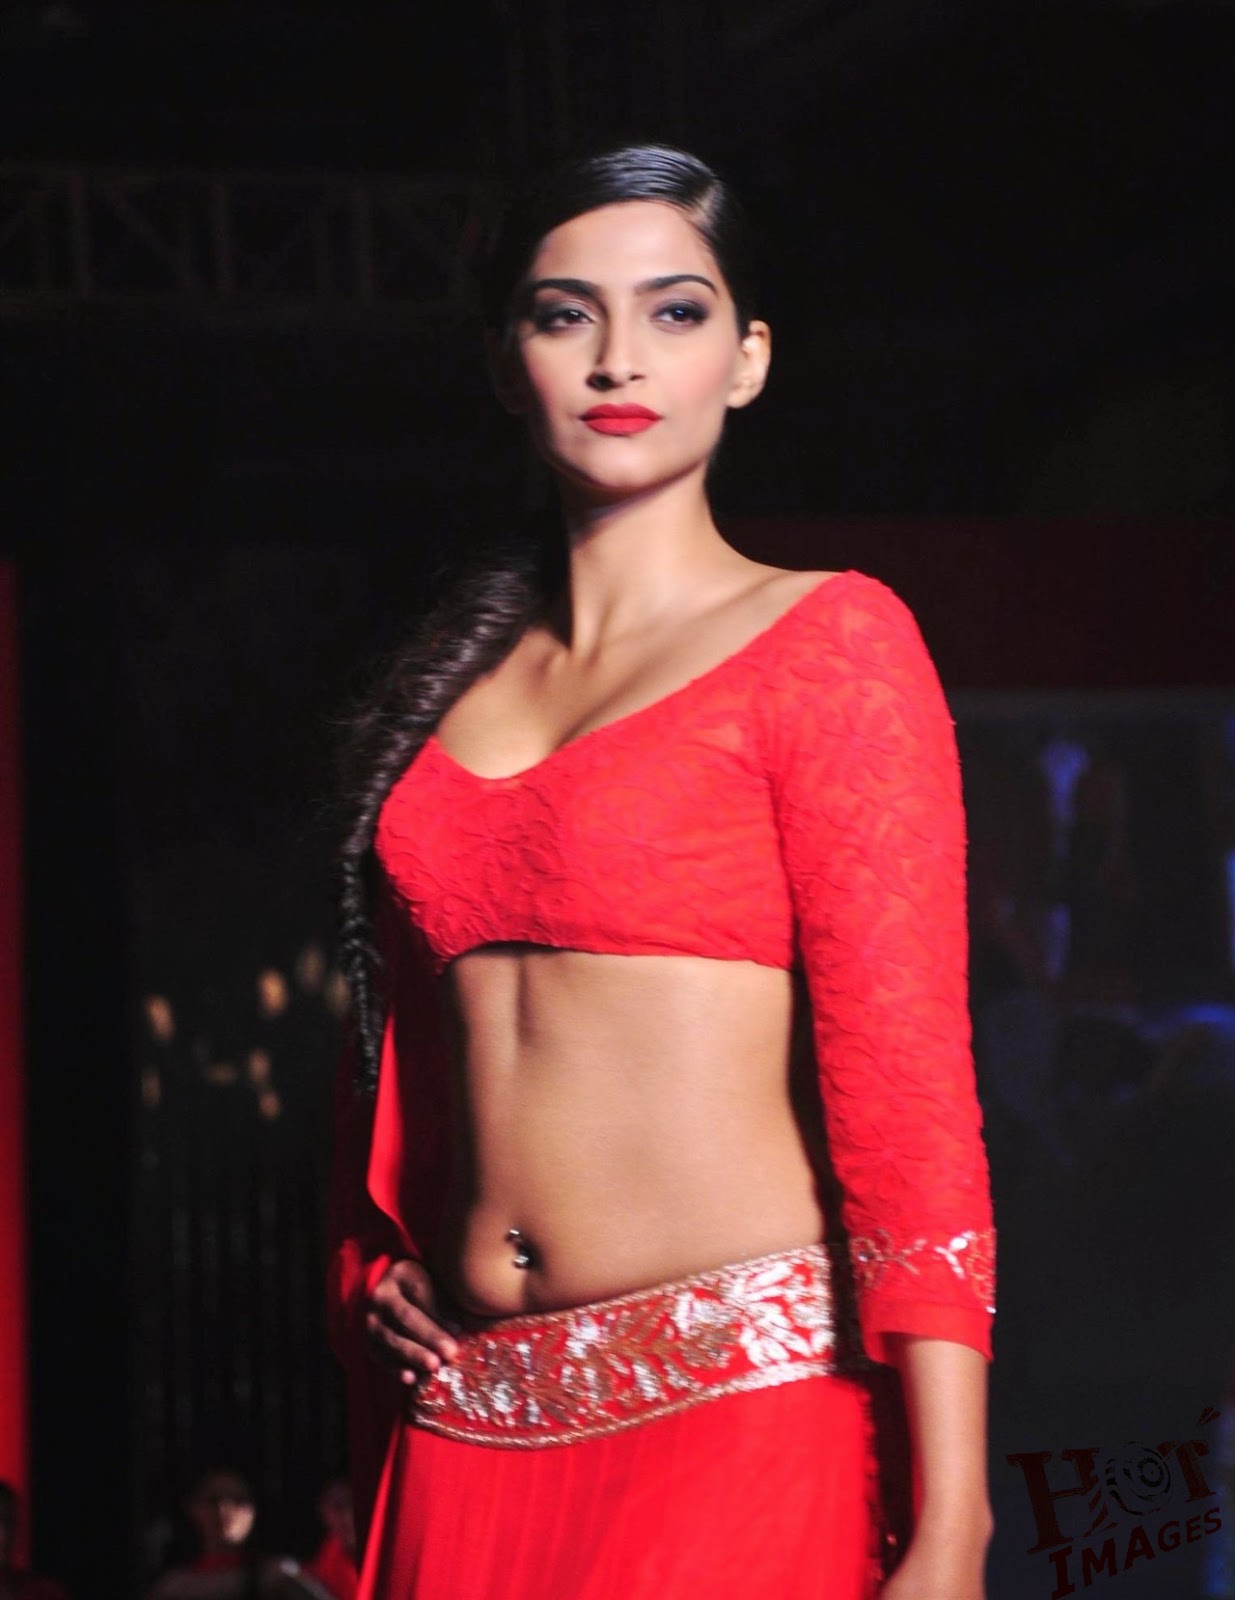 Sexy Sonam Kapoor Hot Navel Show Photos in Red Dress - HOT IMAGES